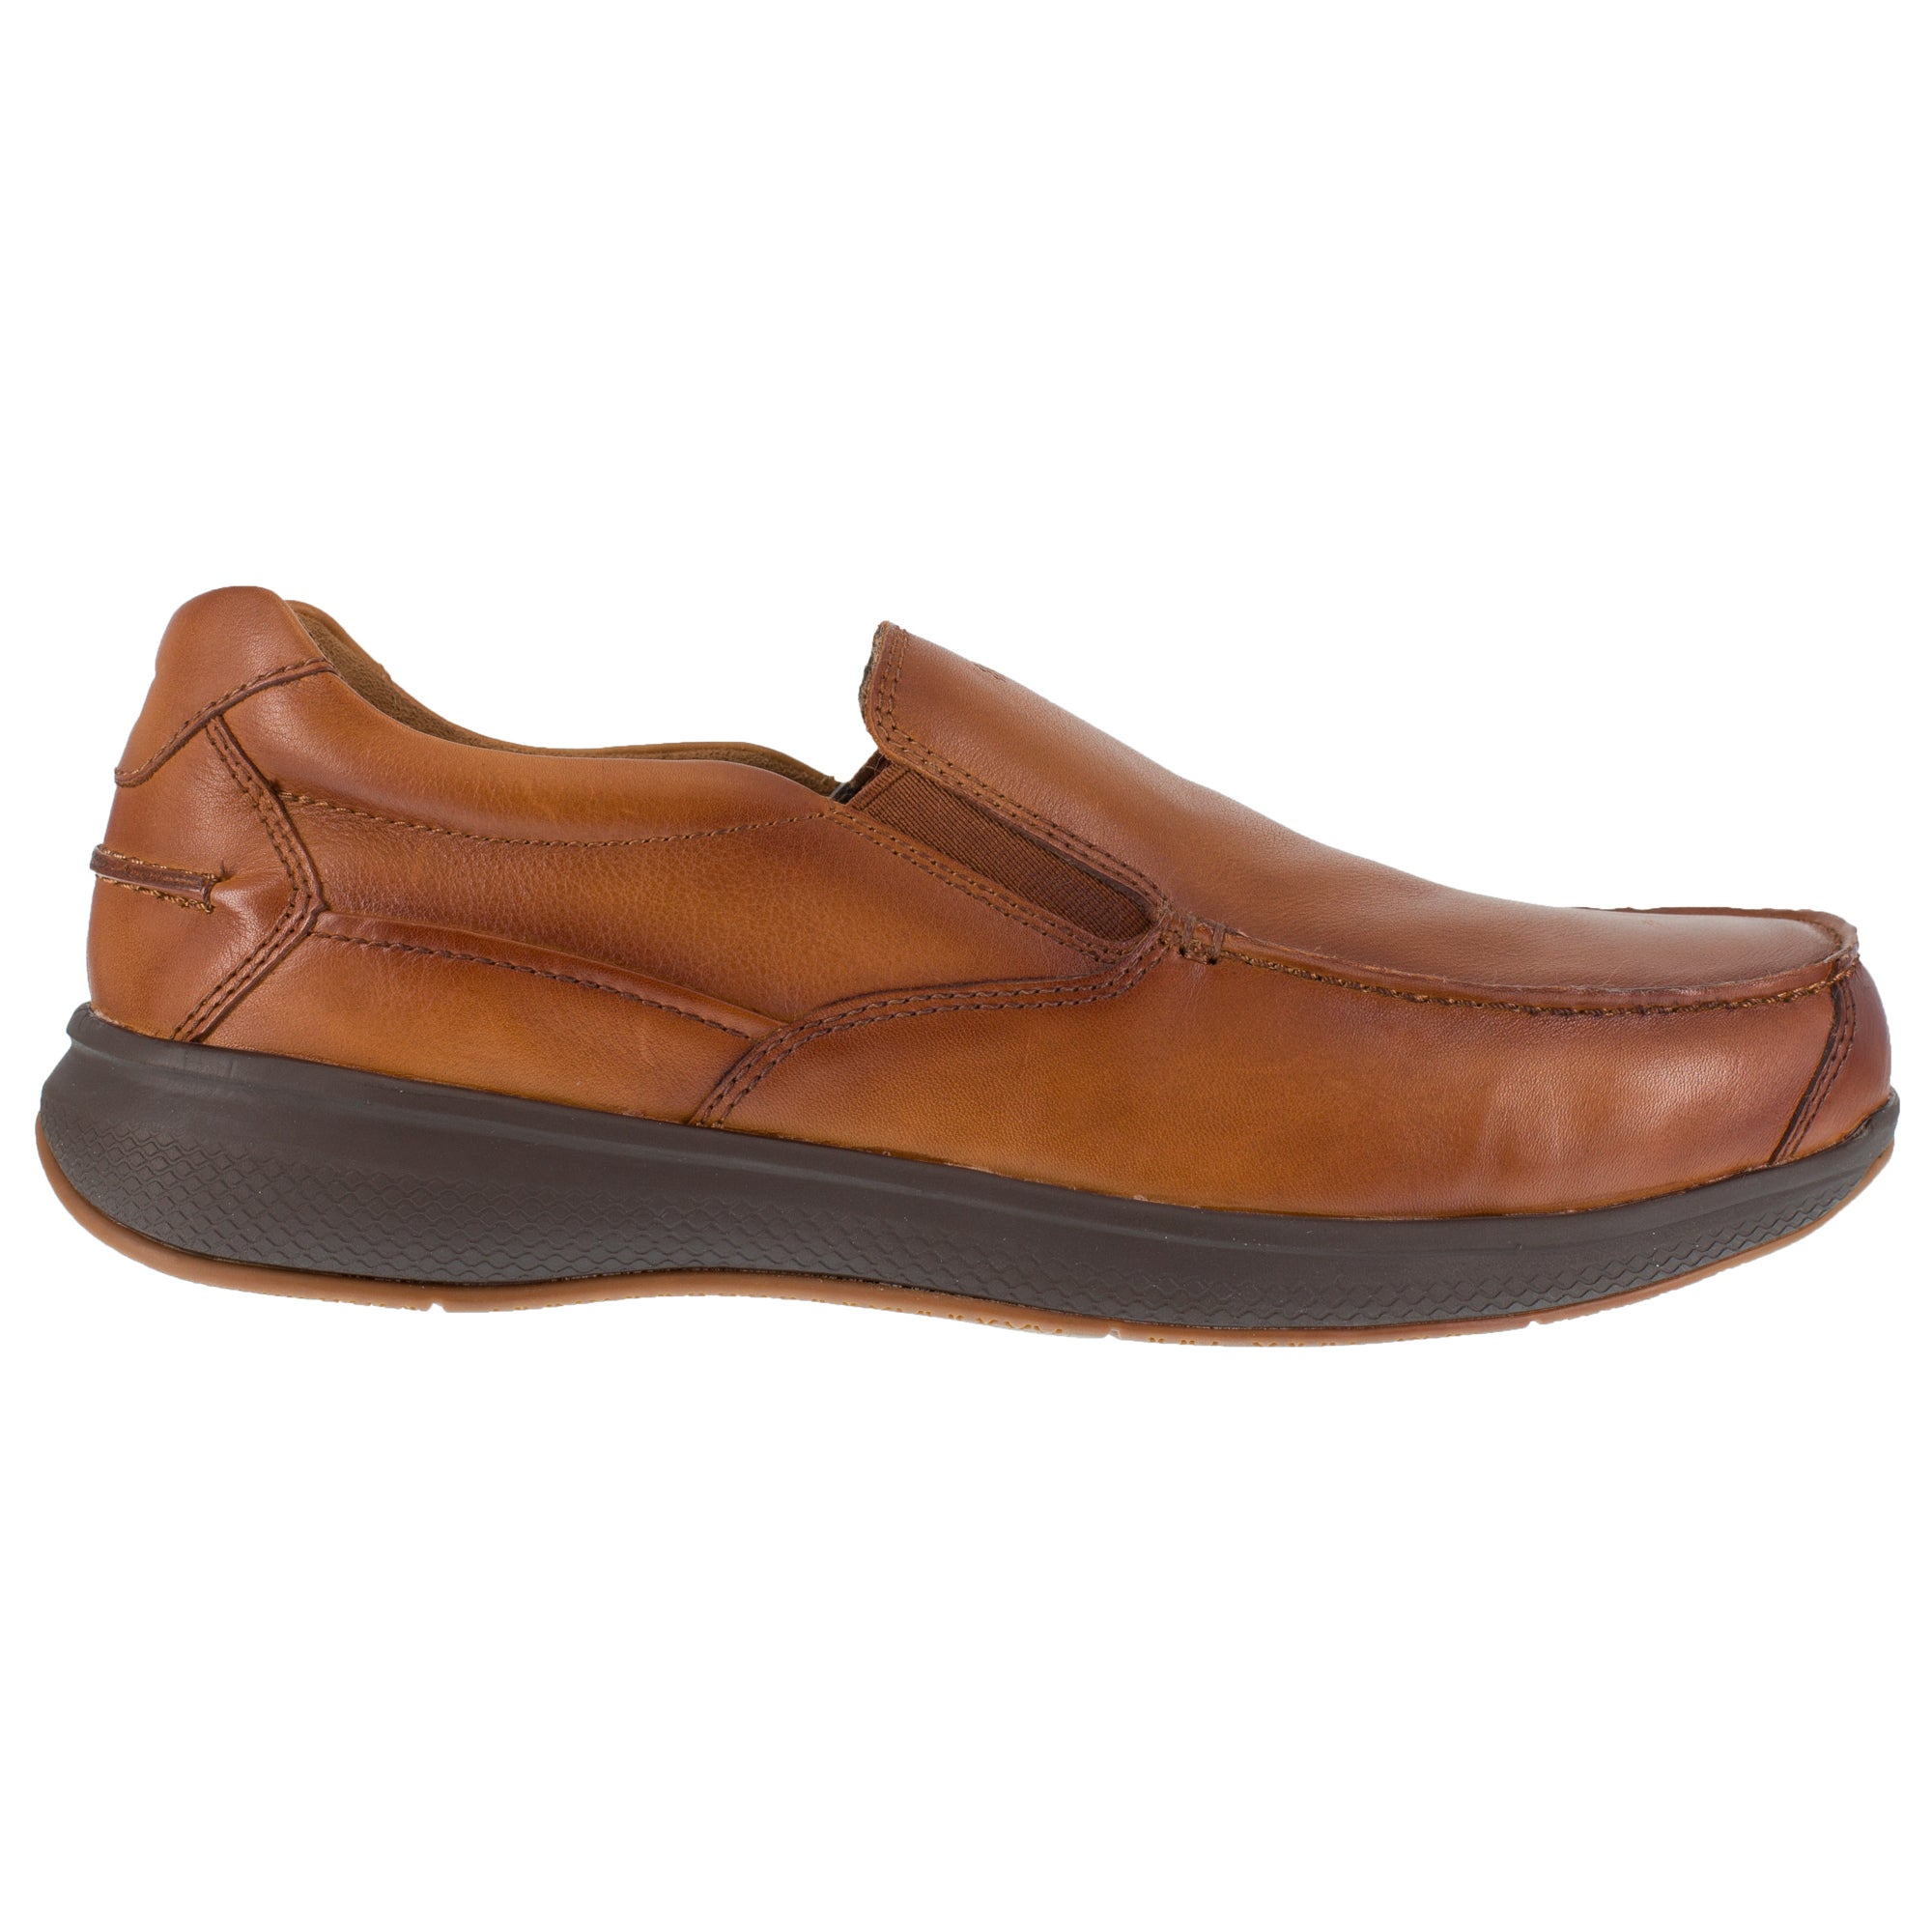 Florsheim Cognac Leather Loafers Bayside ST Slip-On Boat – The Western Company